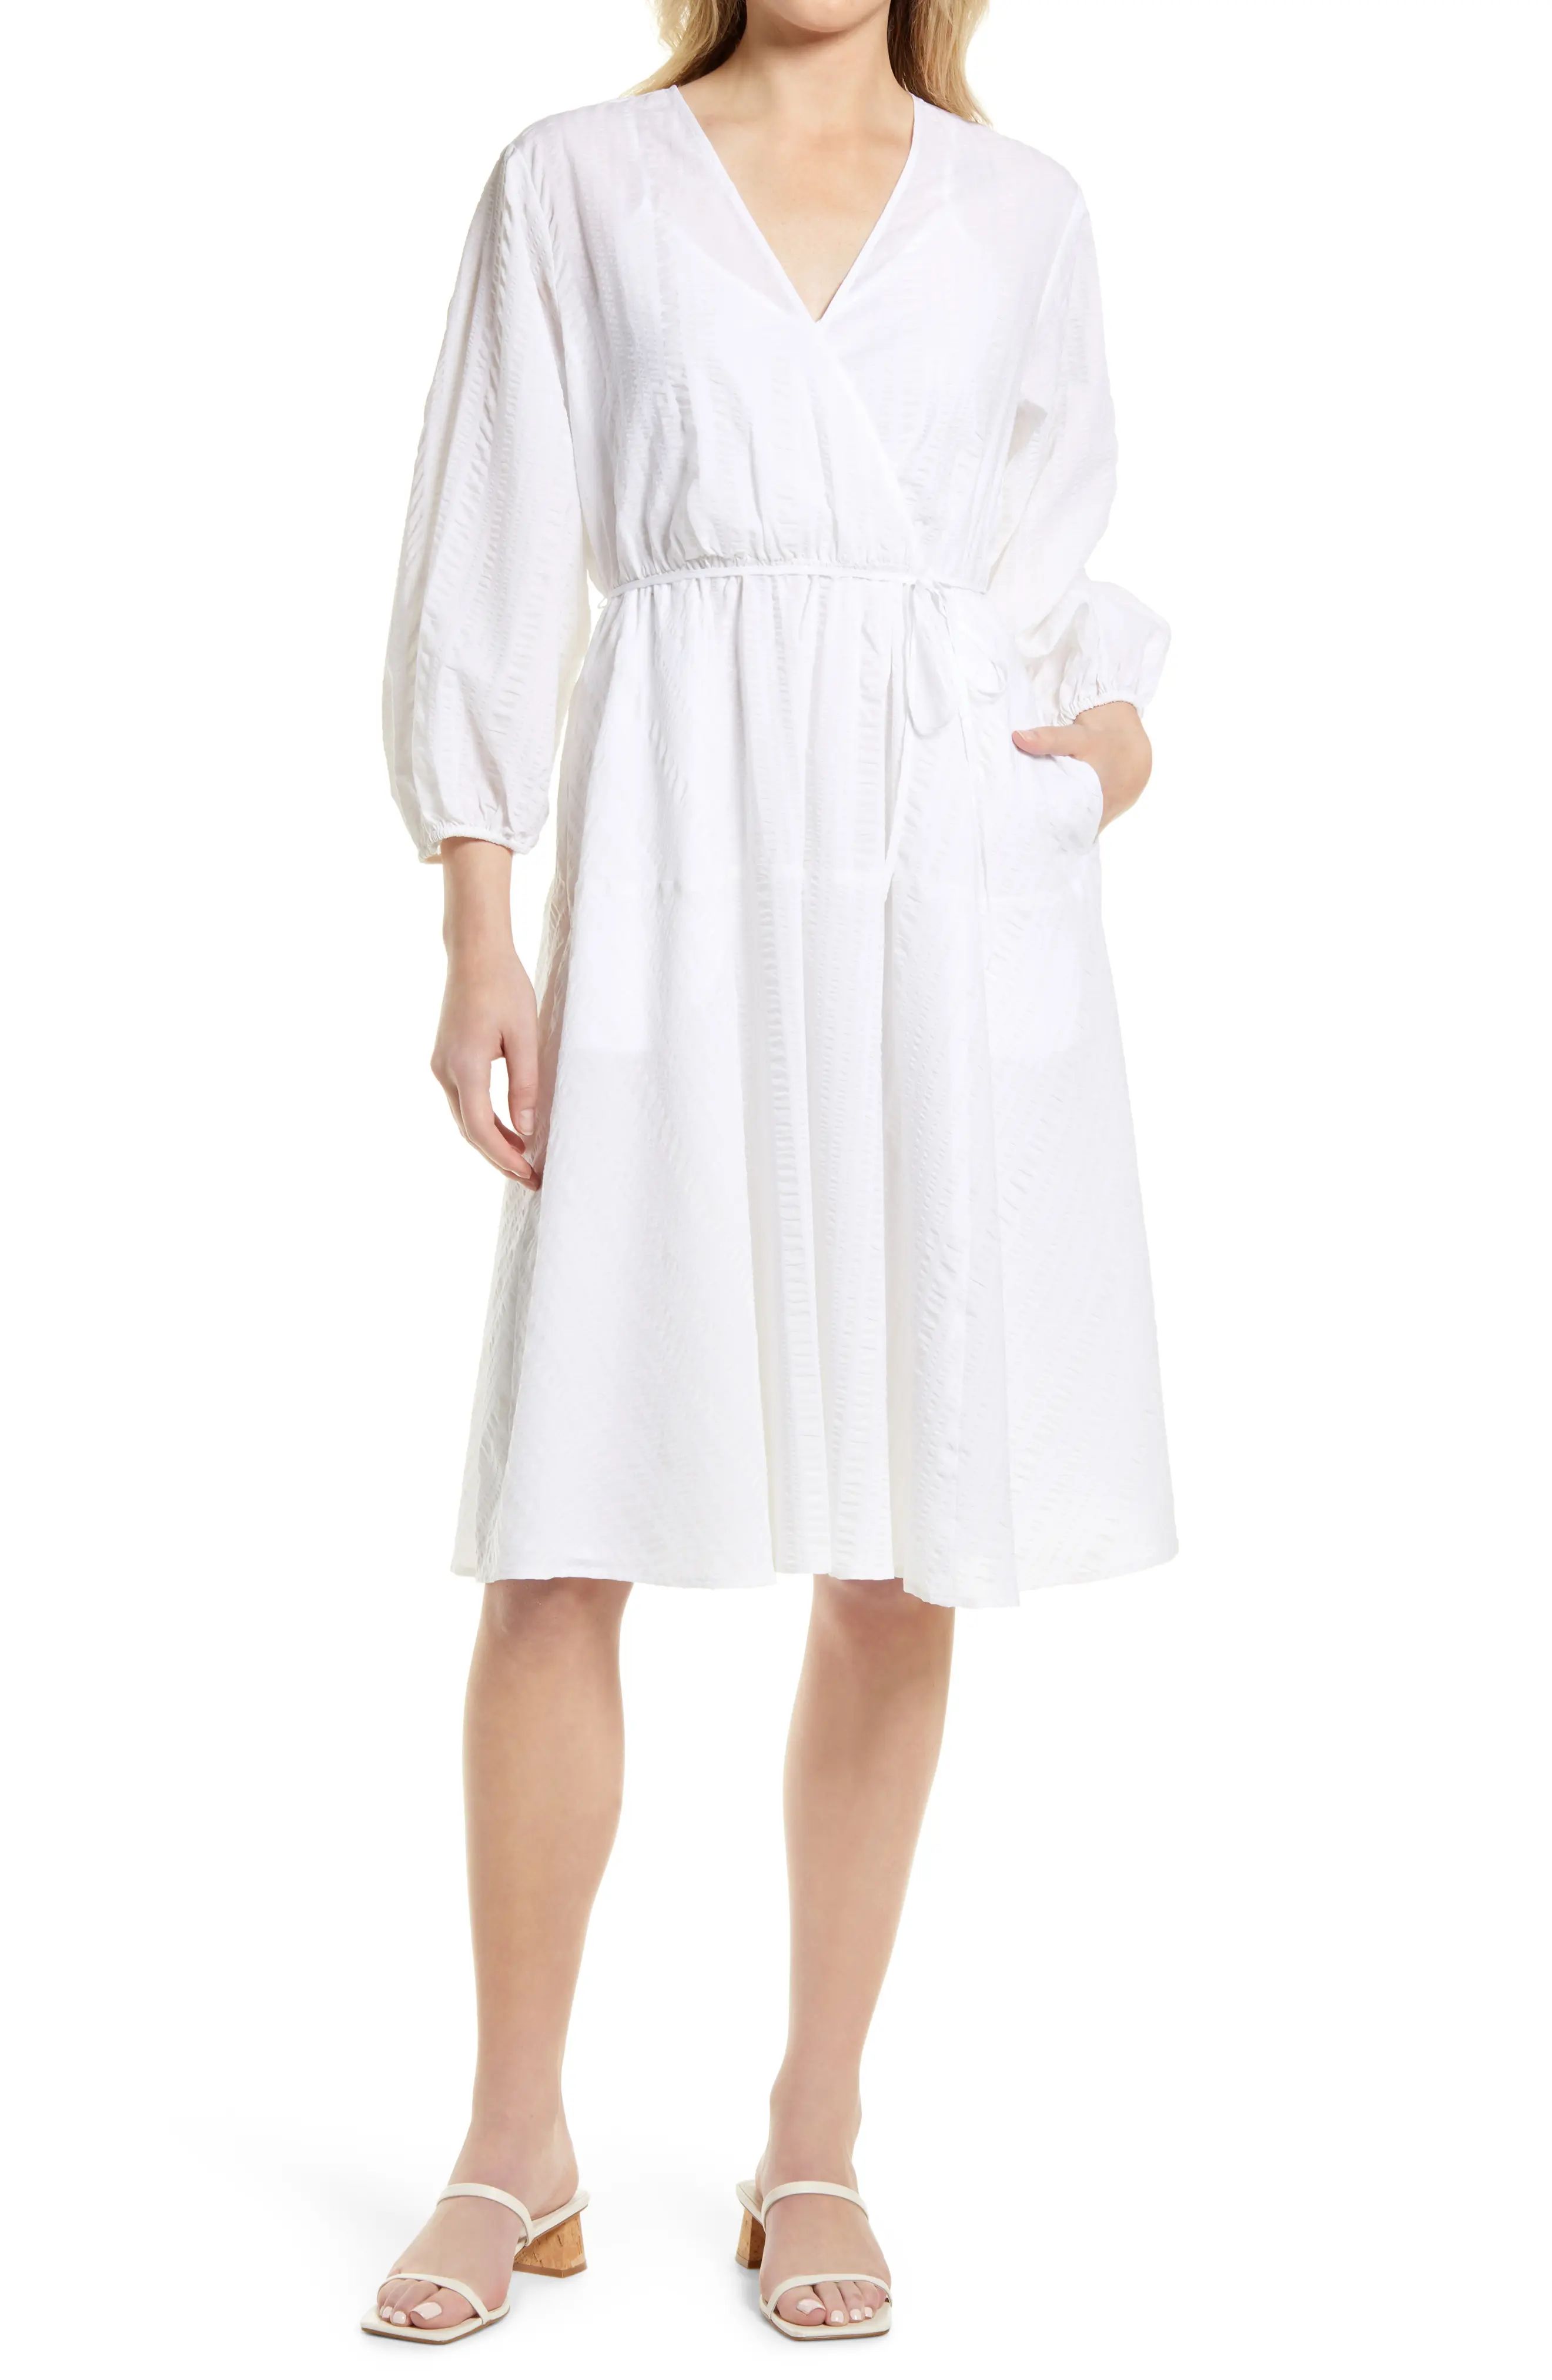 Nordstrom Long Sleeve Faux Wrap Dress in White at Nordstrom, Size Small | Nordstrom